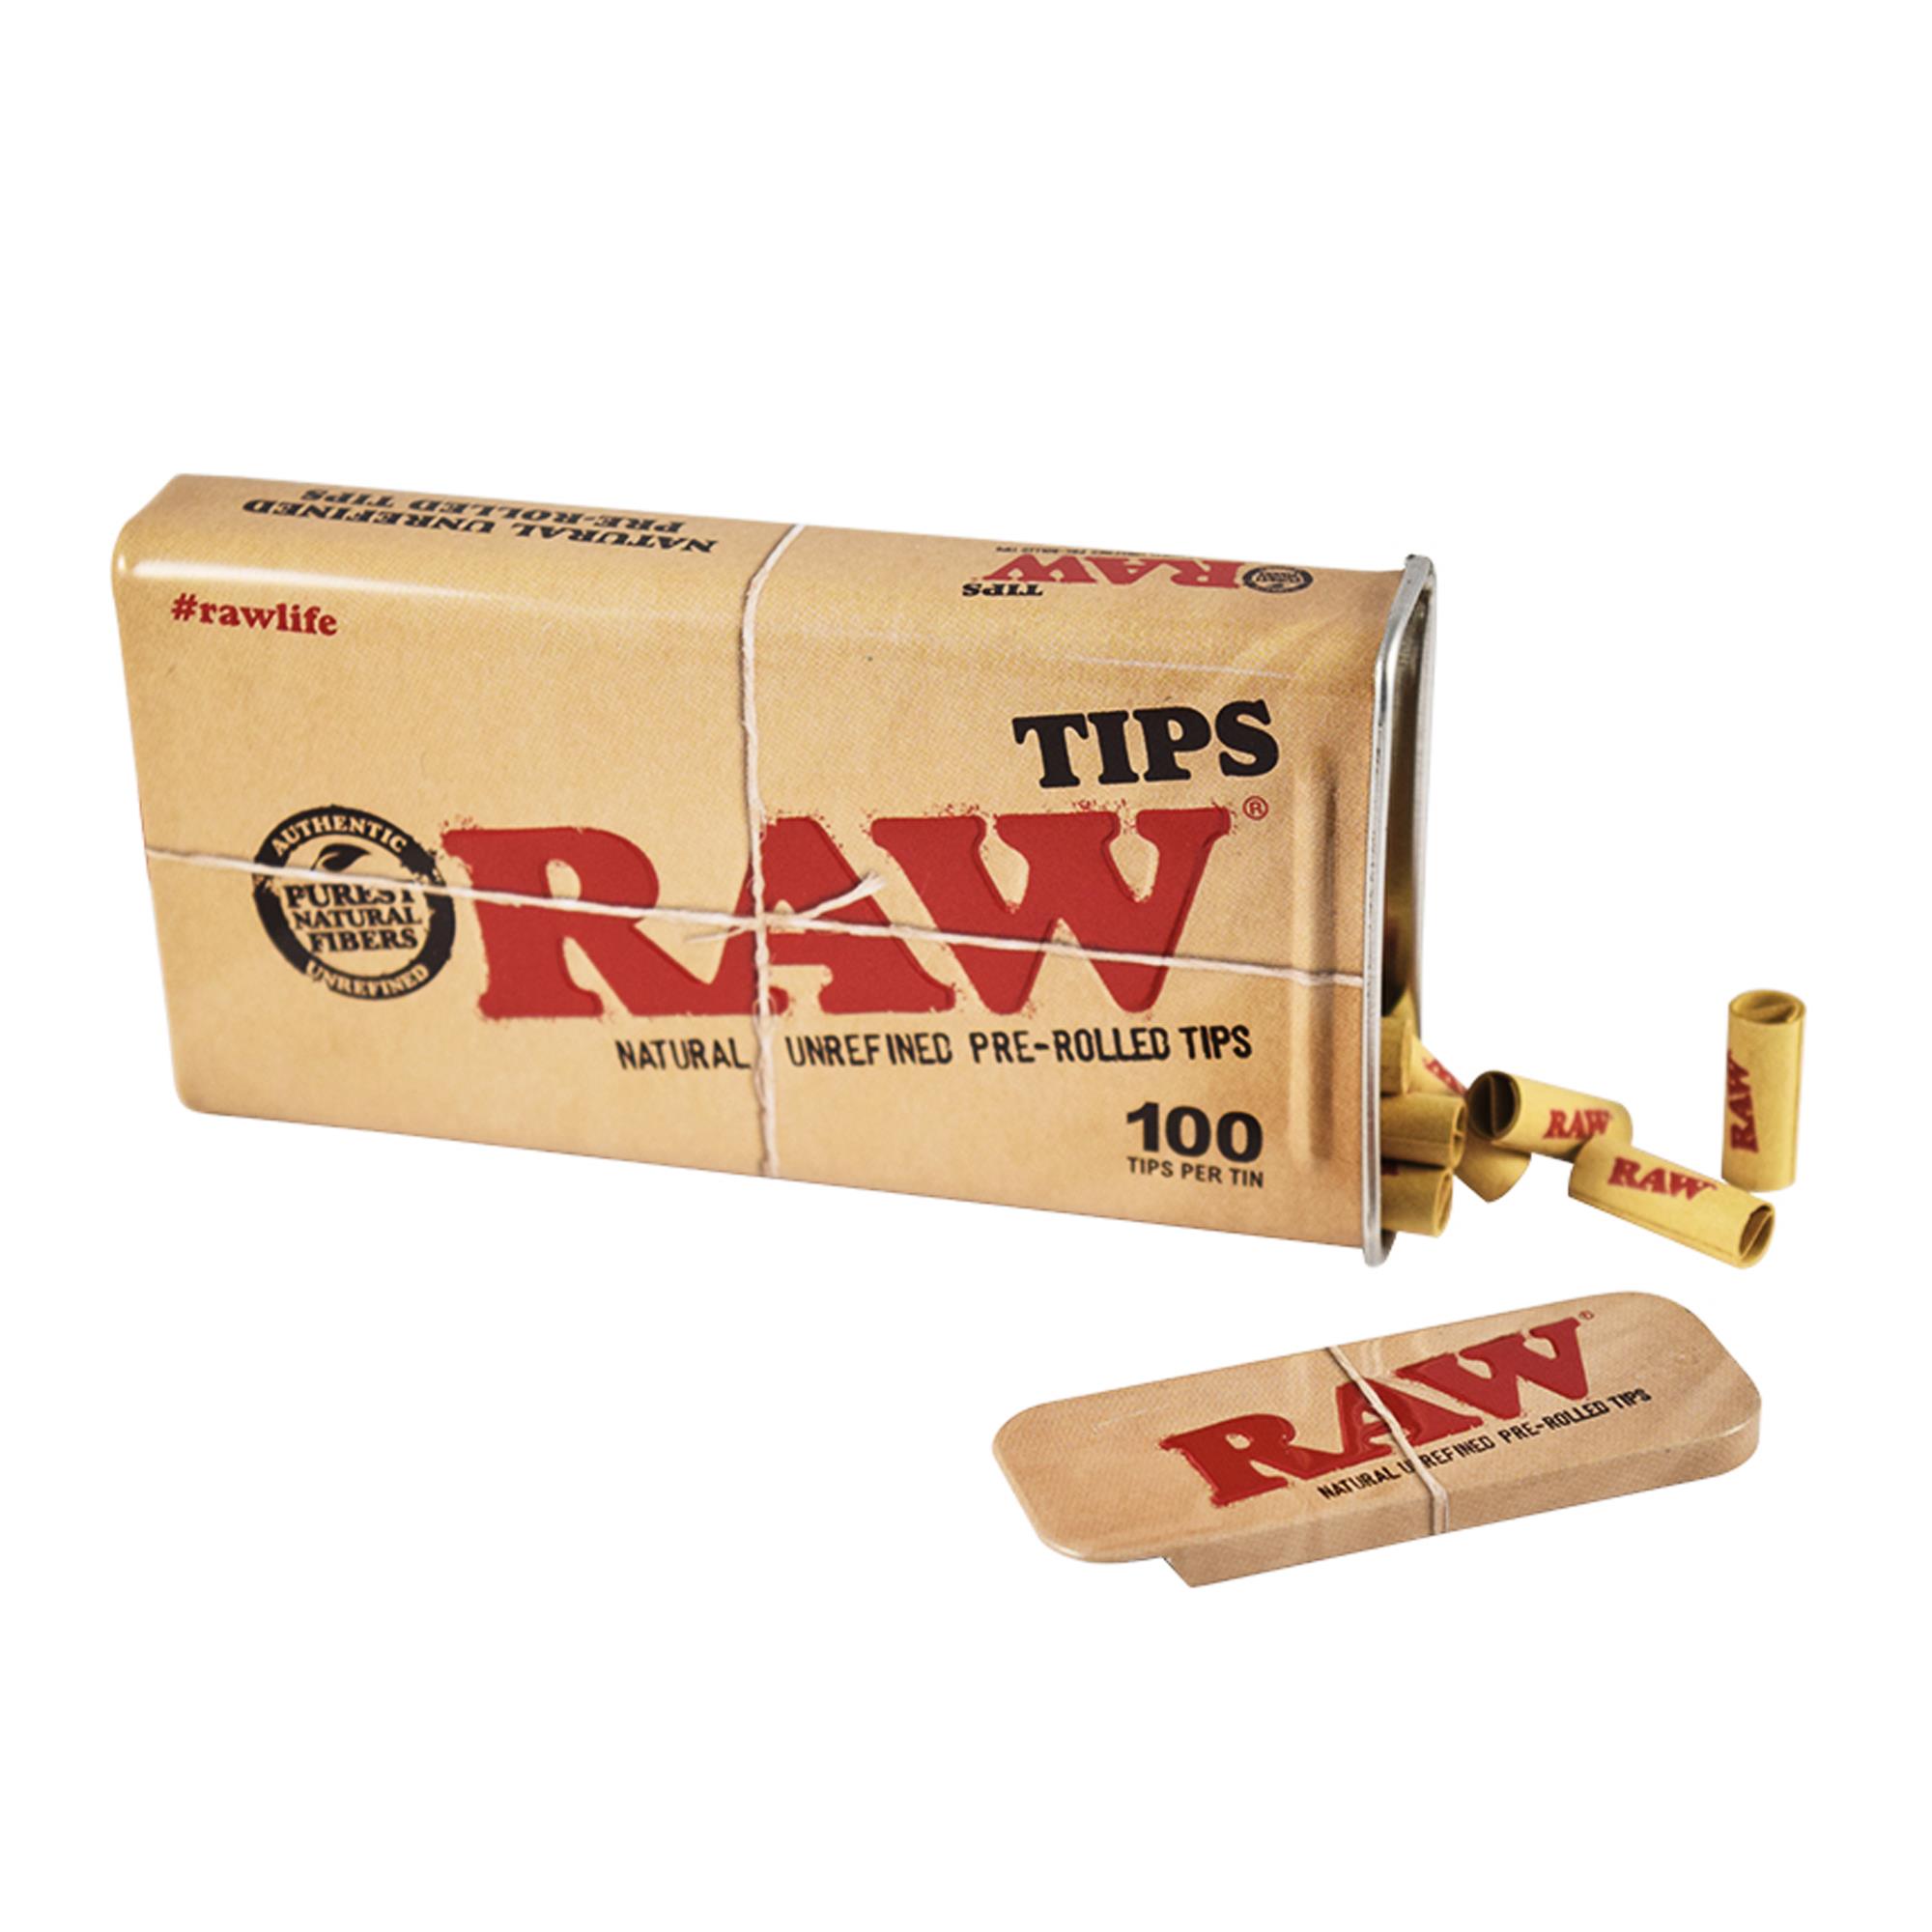 RAW PRE-ROLLED UNBLEACHED TIPS